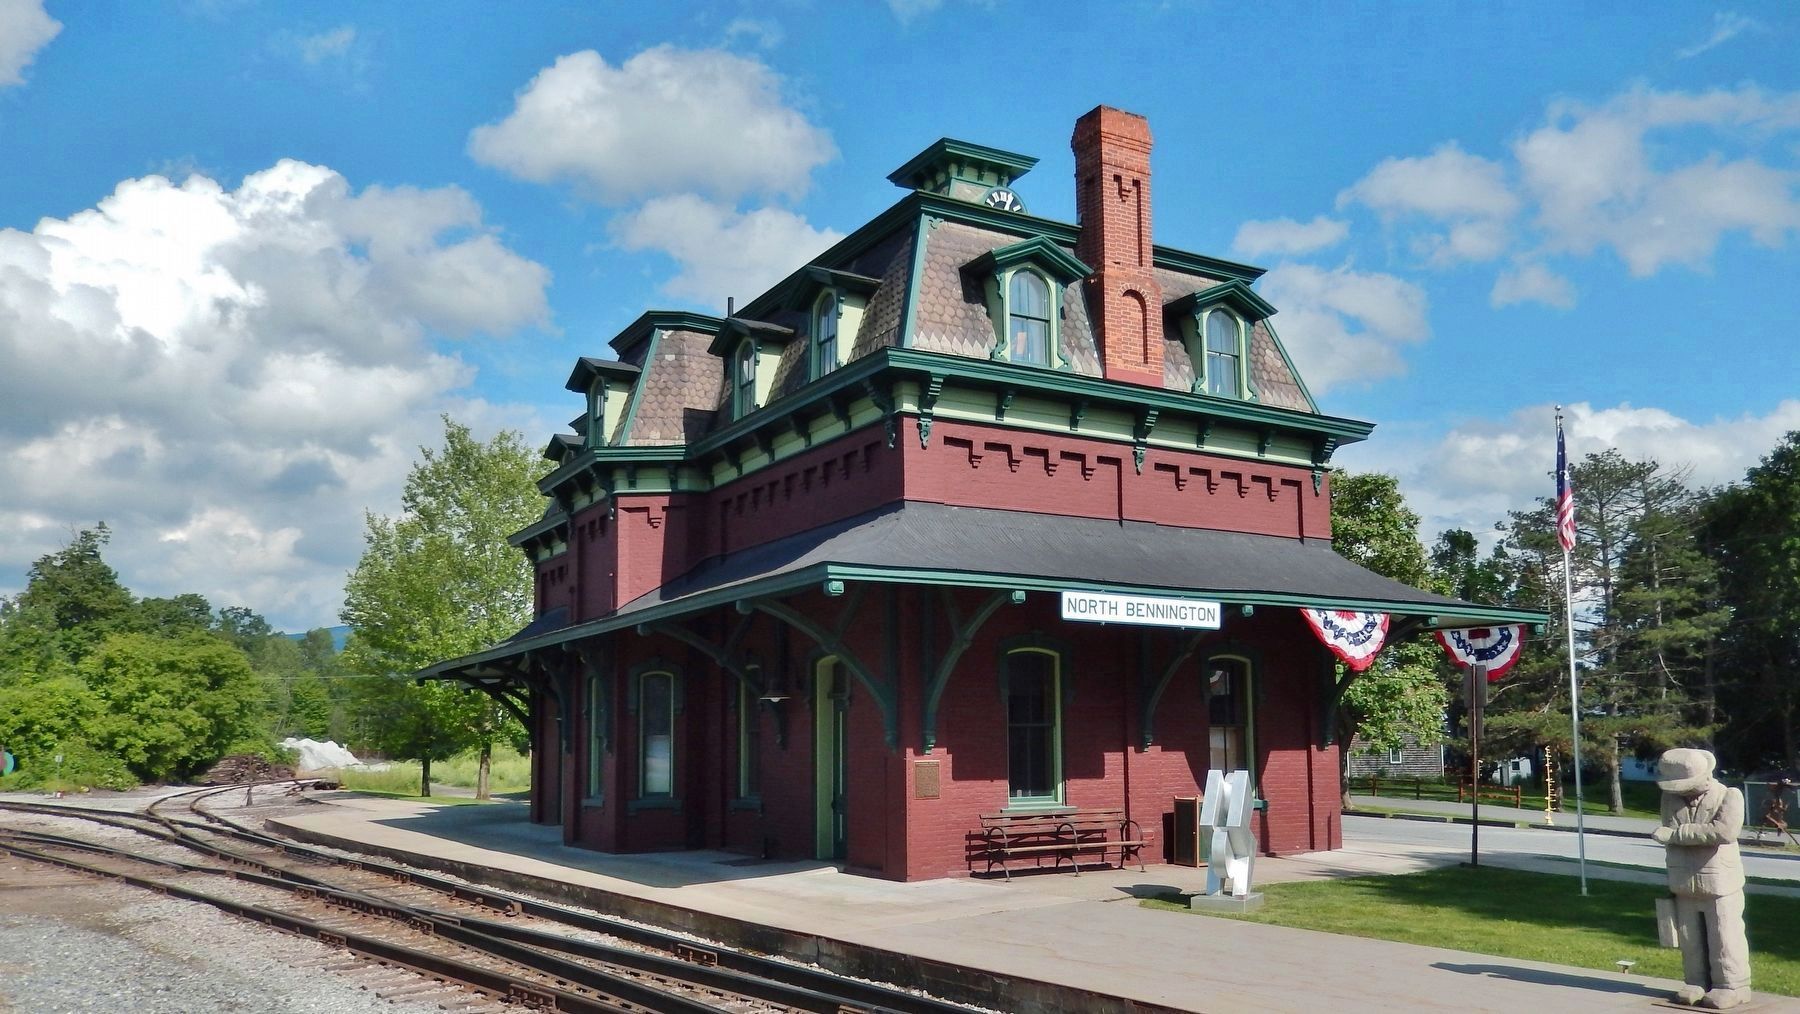 North Bennington Railroad Station (<i>view from railroad tracks; modern sculpture front & right</i>) image. Click for full size.